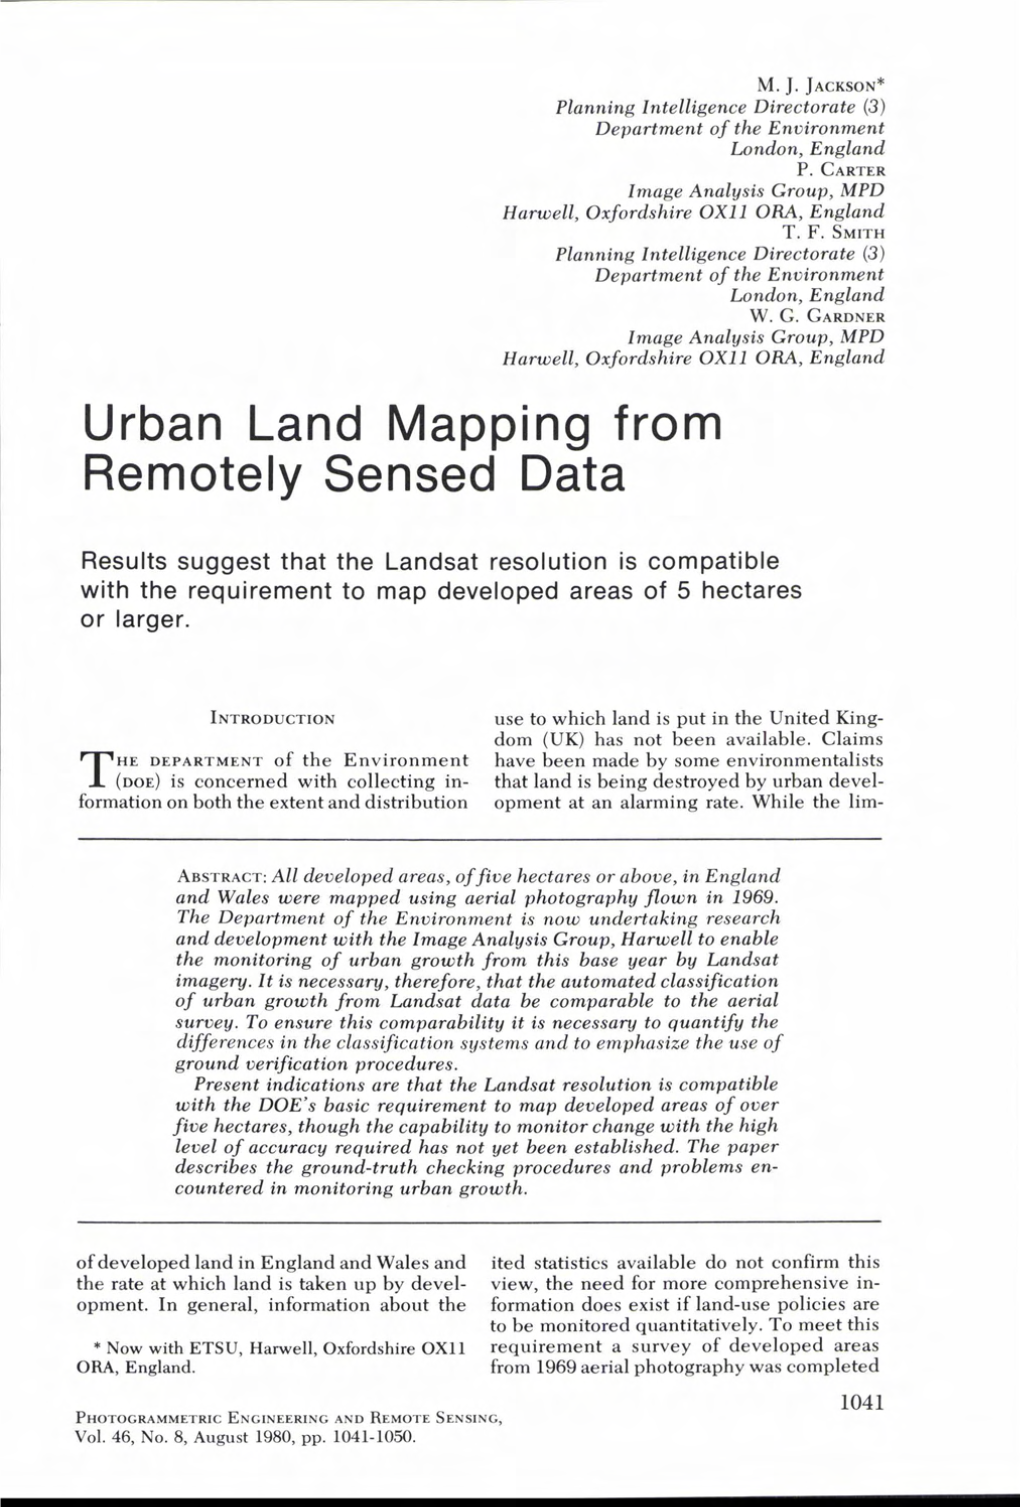 Urban Land Mapping from Remotely Sensed Data